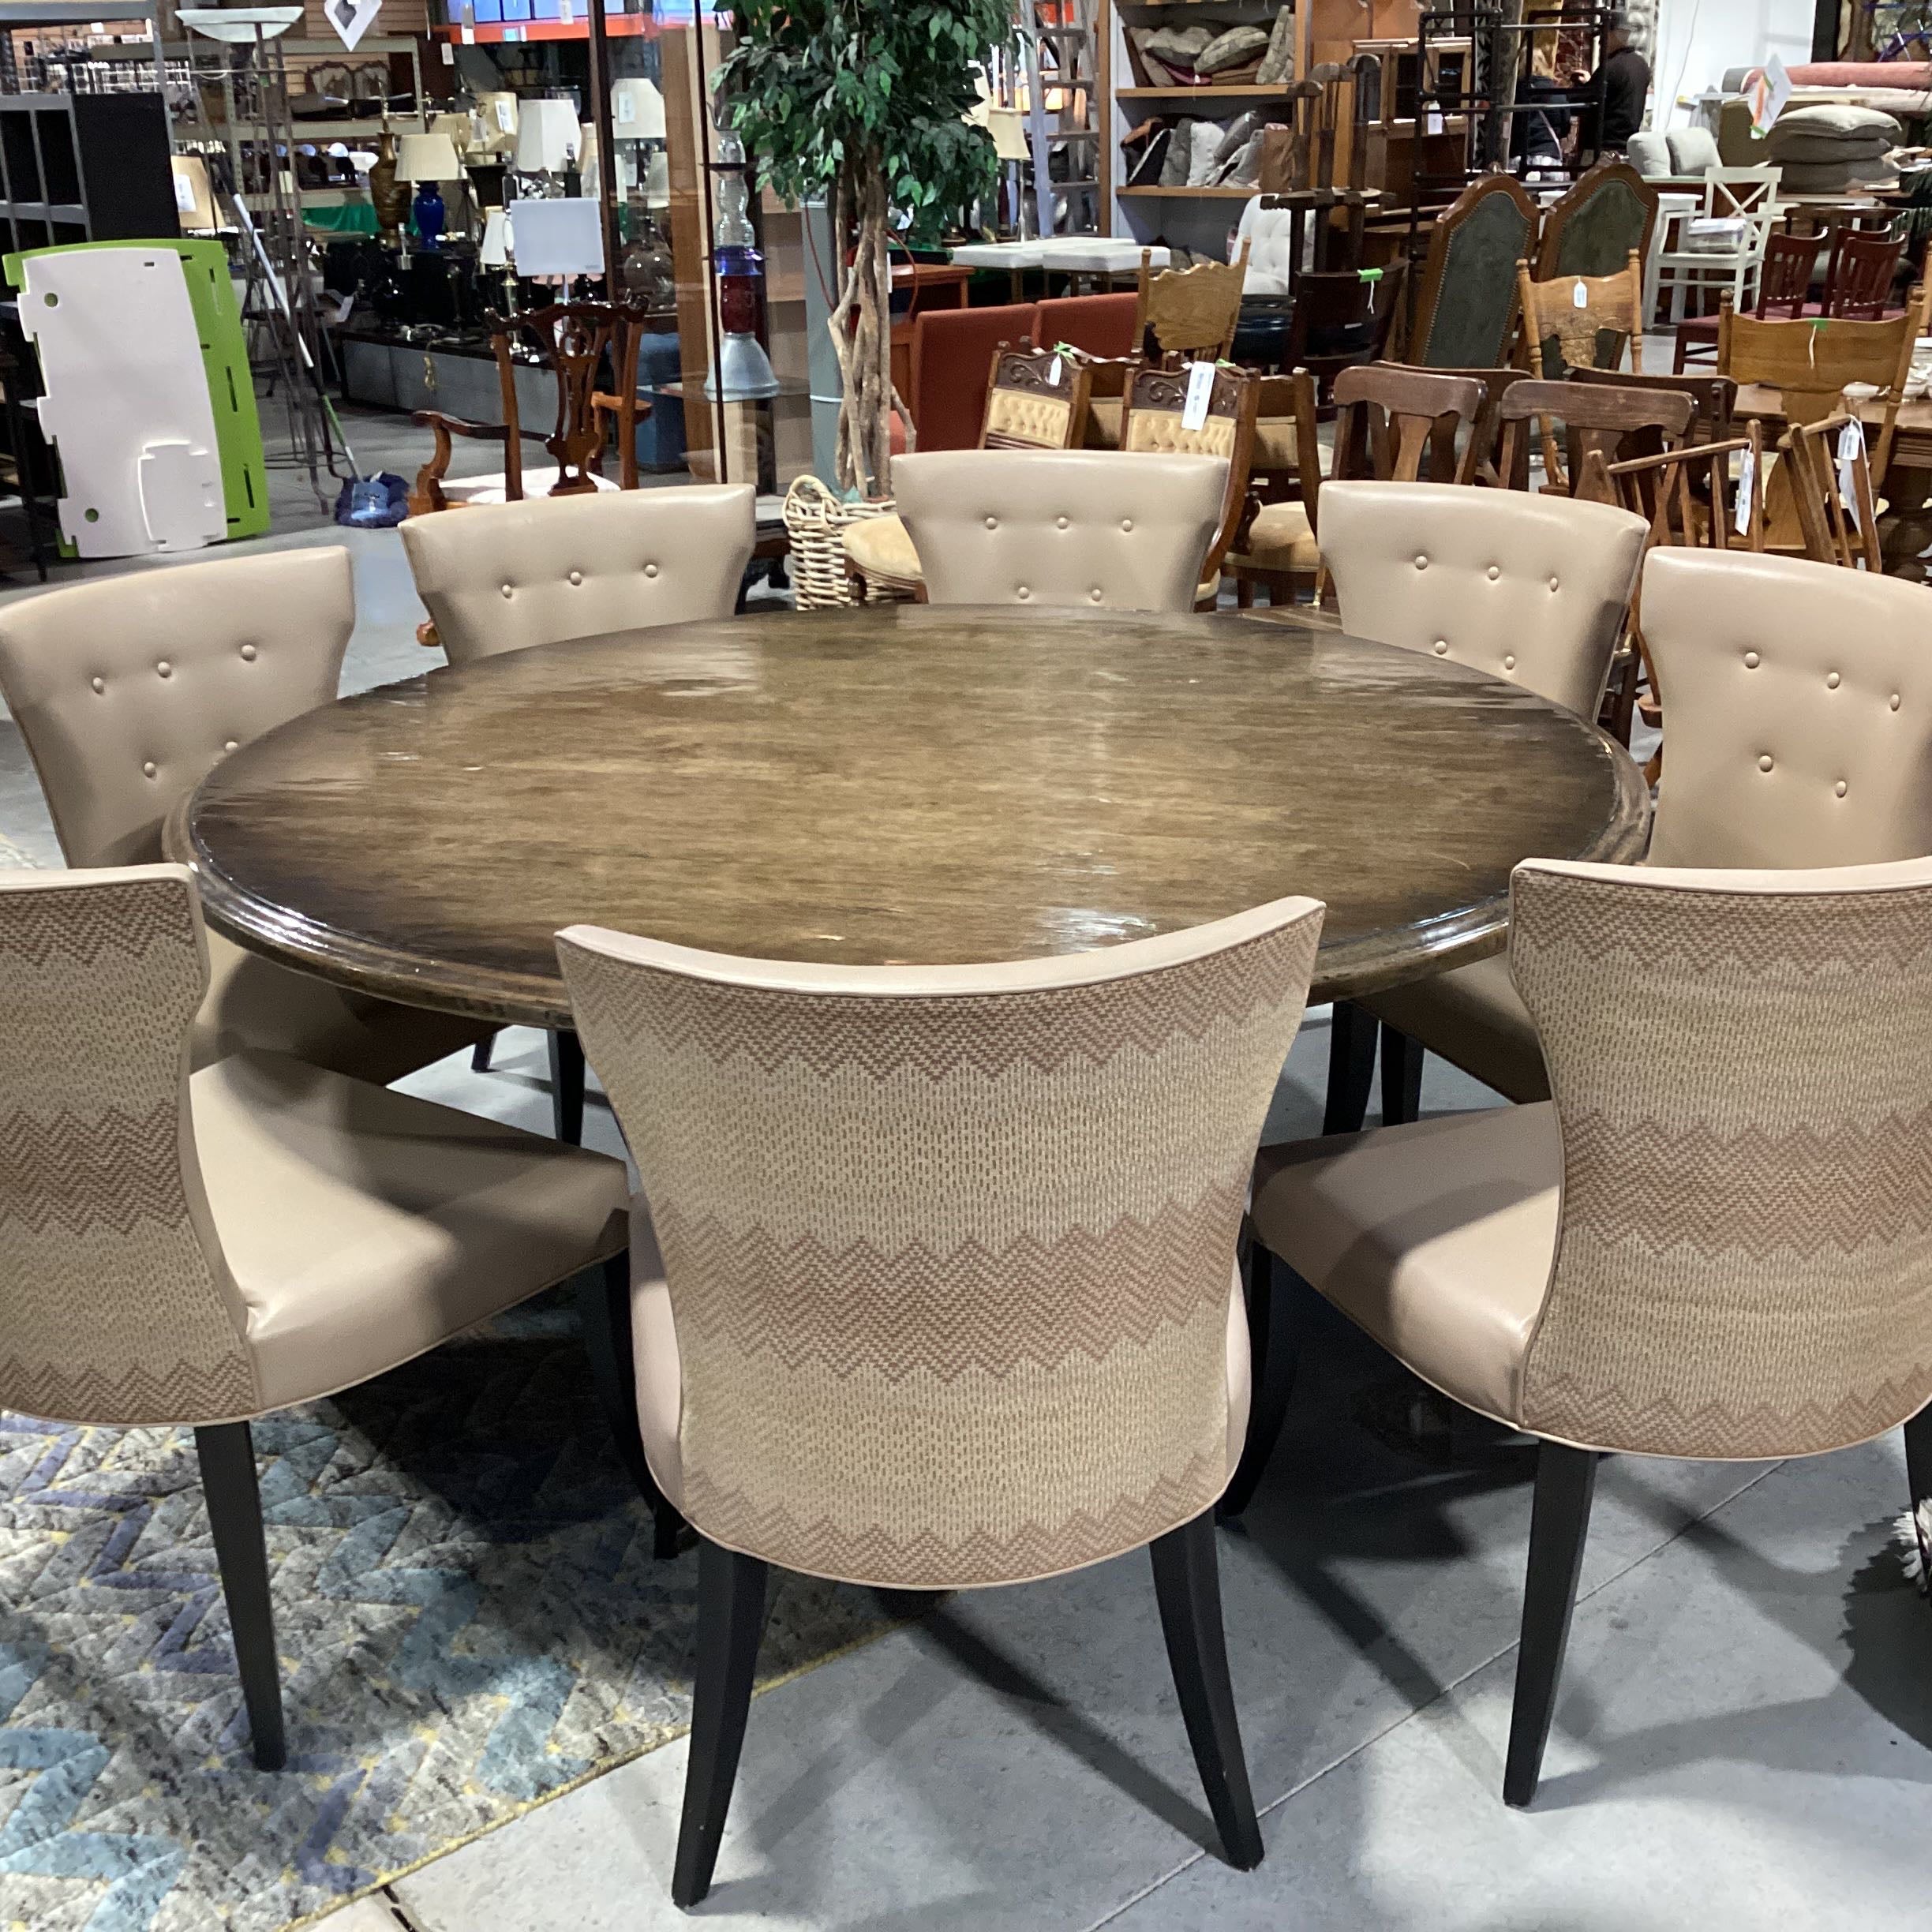 Round Dark Distressed Wood Concrete Pedestal Table 8 Leather with Upholstered Chairs Dining Set